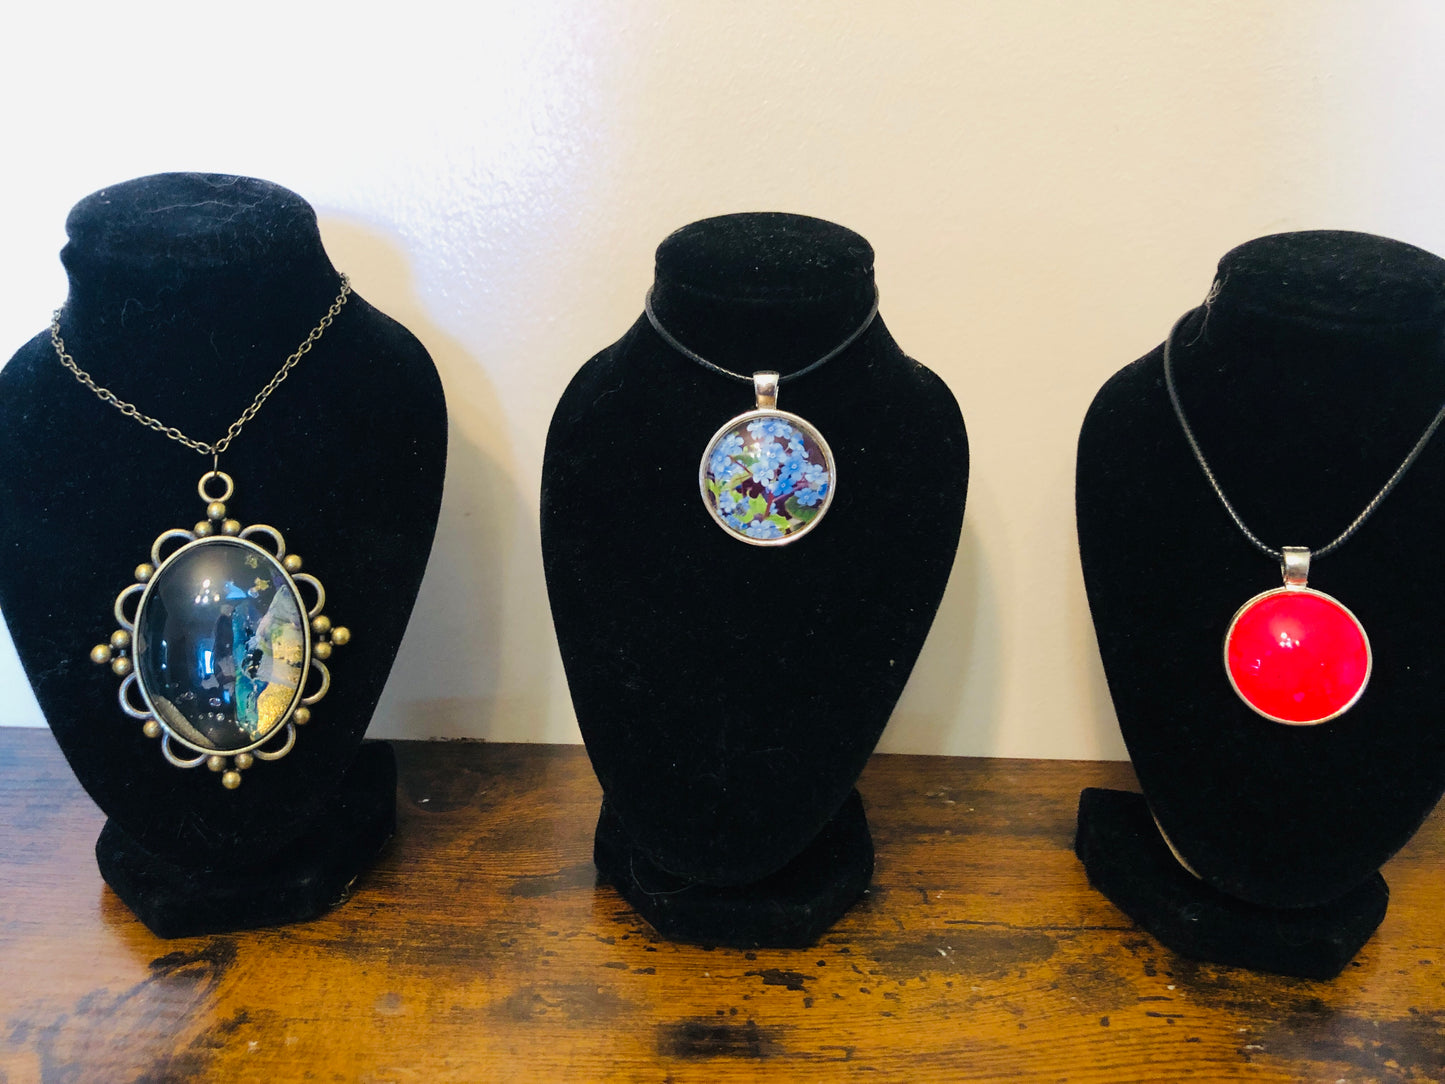 Stunning Statement Stocking Fillers - Gorgeous Gifts-Hand Made @ Half Price Pendants 🤩